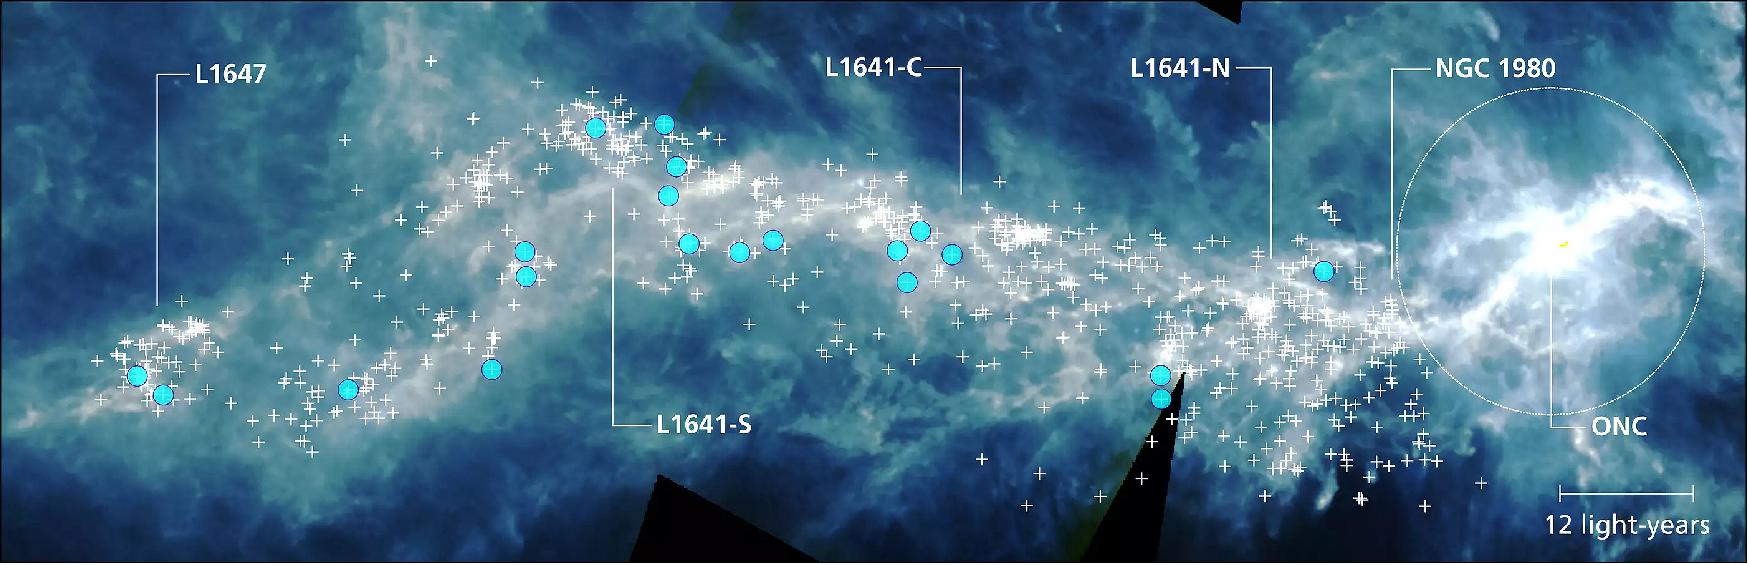 Figure 26: This image depicts the giant Orion A star-forming cloud as observed by the SPIRE (Spectral and Photometric Imaging Receiver) instrument on-board the Herschel Space Telescope. It traces the large-scale distribution of cold dust. Orion A is about 1350 light-years away and consists of individual star-forming regions as indicated by their labels. The locations of planet-forming disks (+) observed with ALMA are indicated, while disks with dust masses above an equivalent of 100 earth masses appear as blue dots. The famous Orion Nebula, visible to the naked eye in the sky, hosts the Orion Nebula Cluster (ONC), including several massive stars emitting intense radiation (image credit: S. E. van Terwisga et al./MPIA)